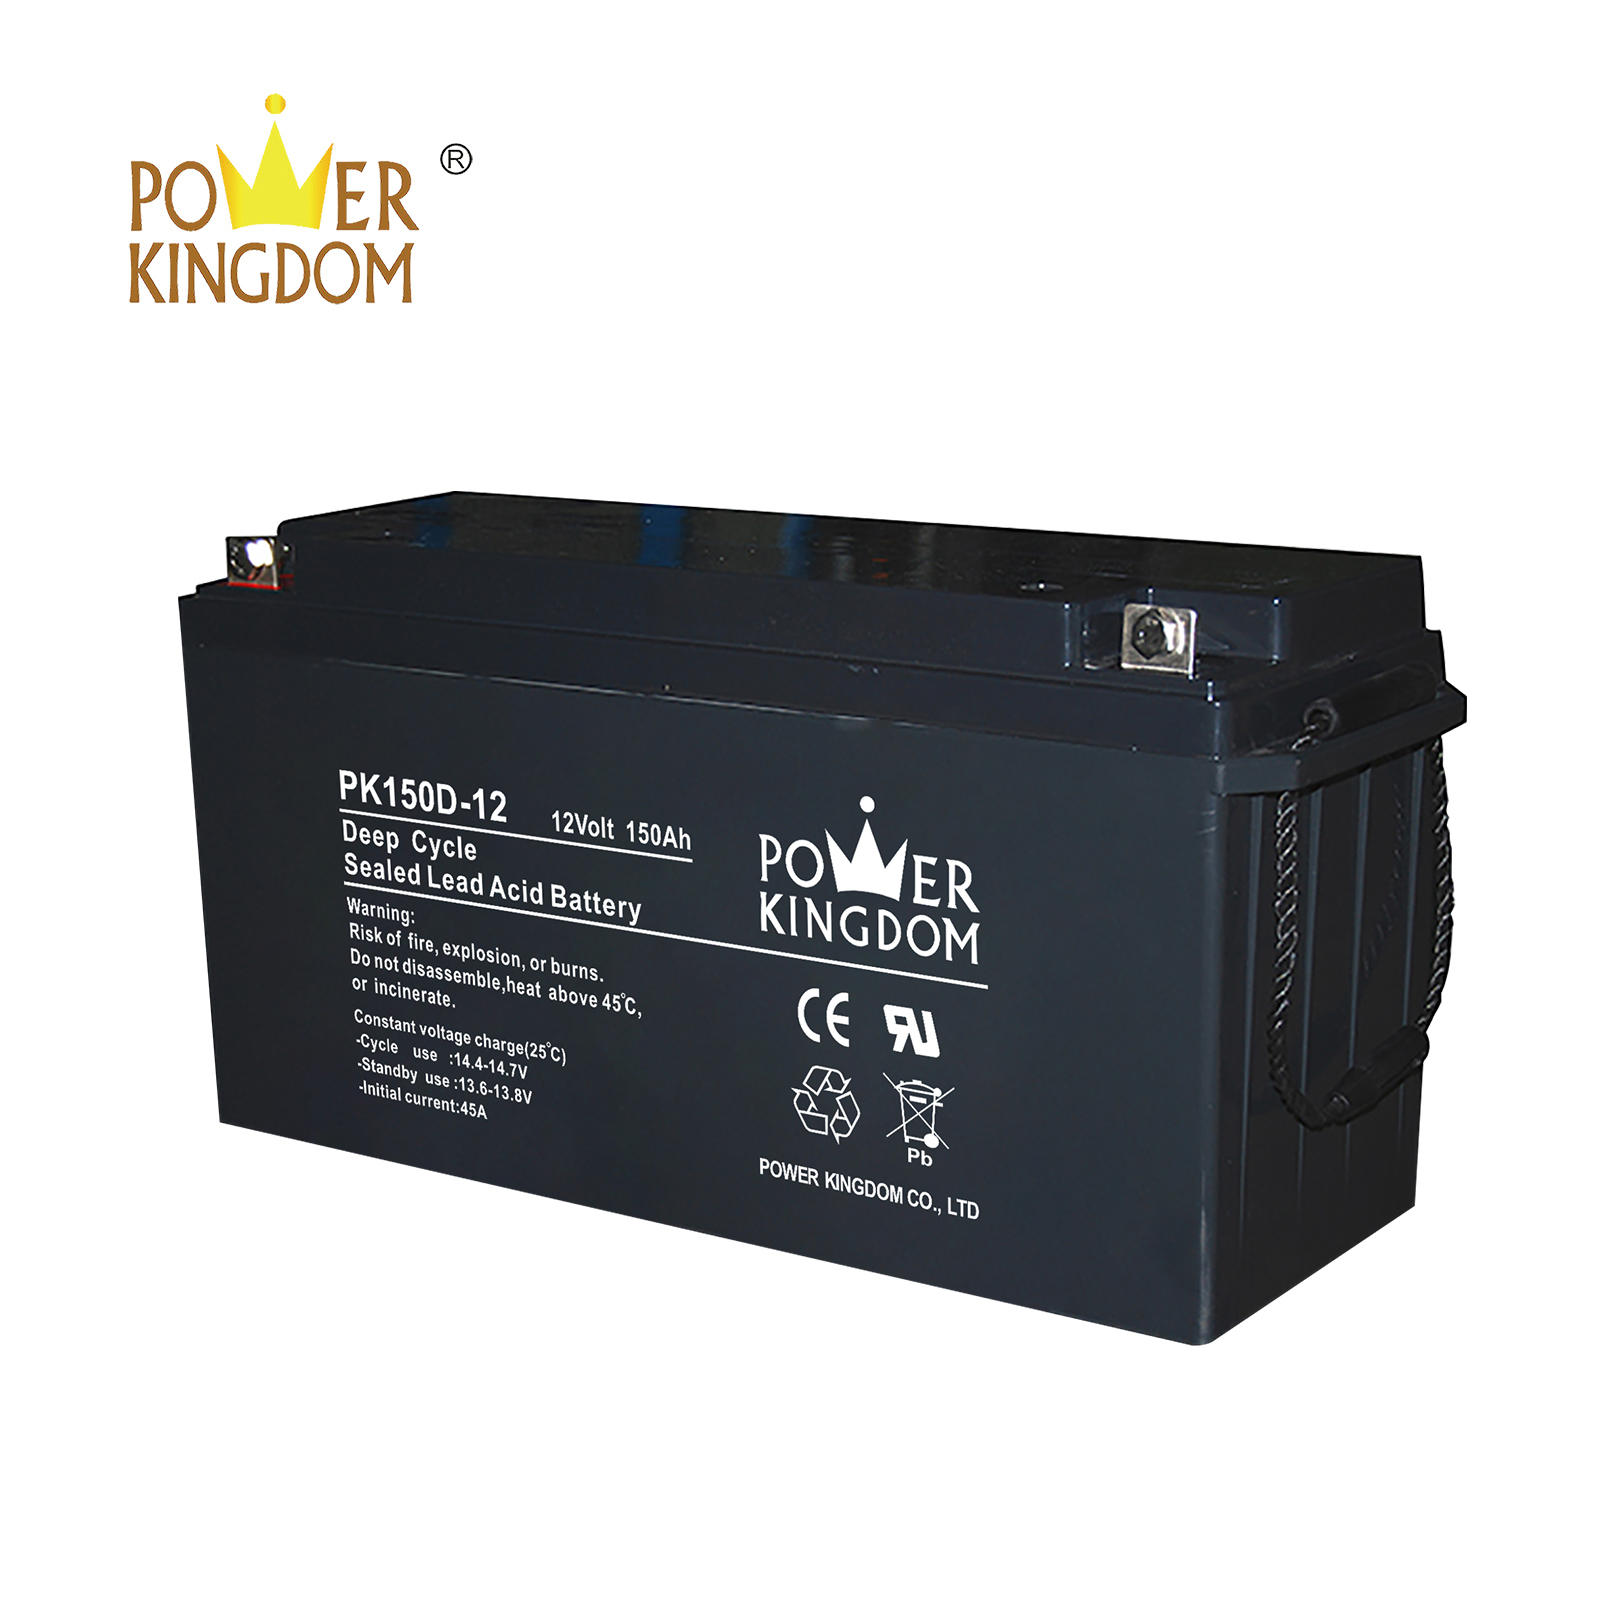 Top quality power kingdom battery for UPS or solar system